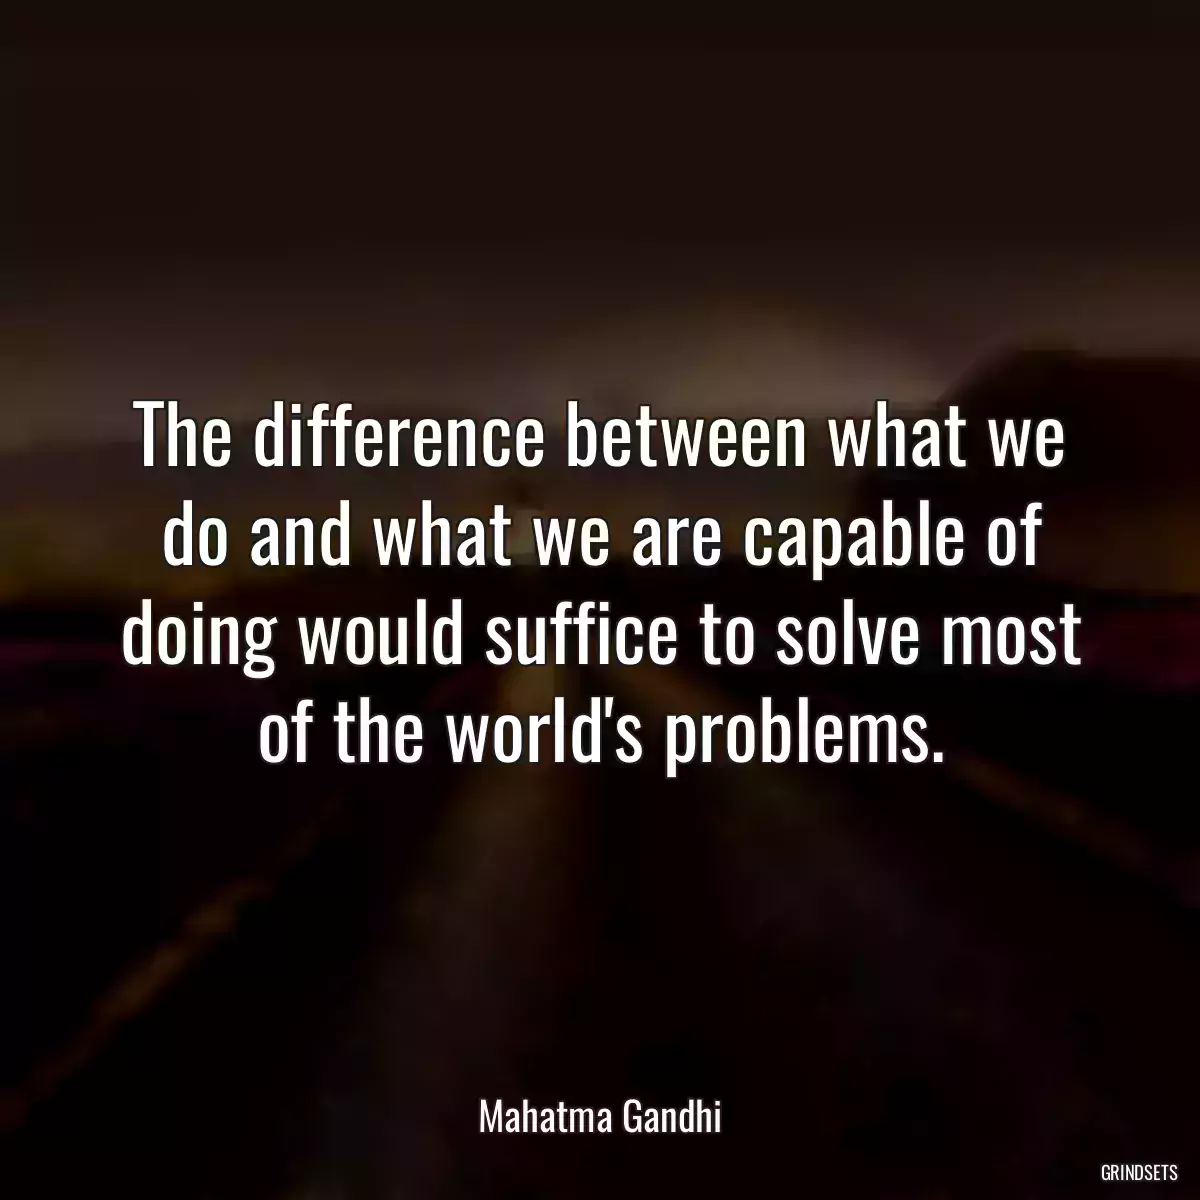 The difference between what we do and what we are capable of doing would suffice to solve most of the world\'s problems.